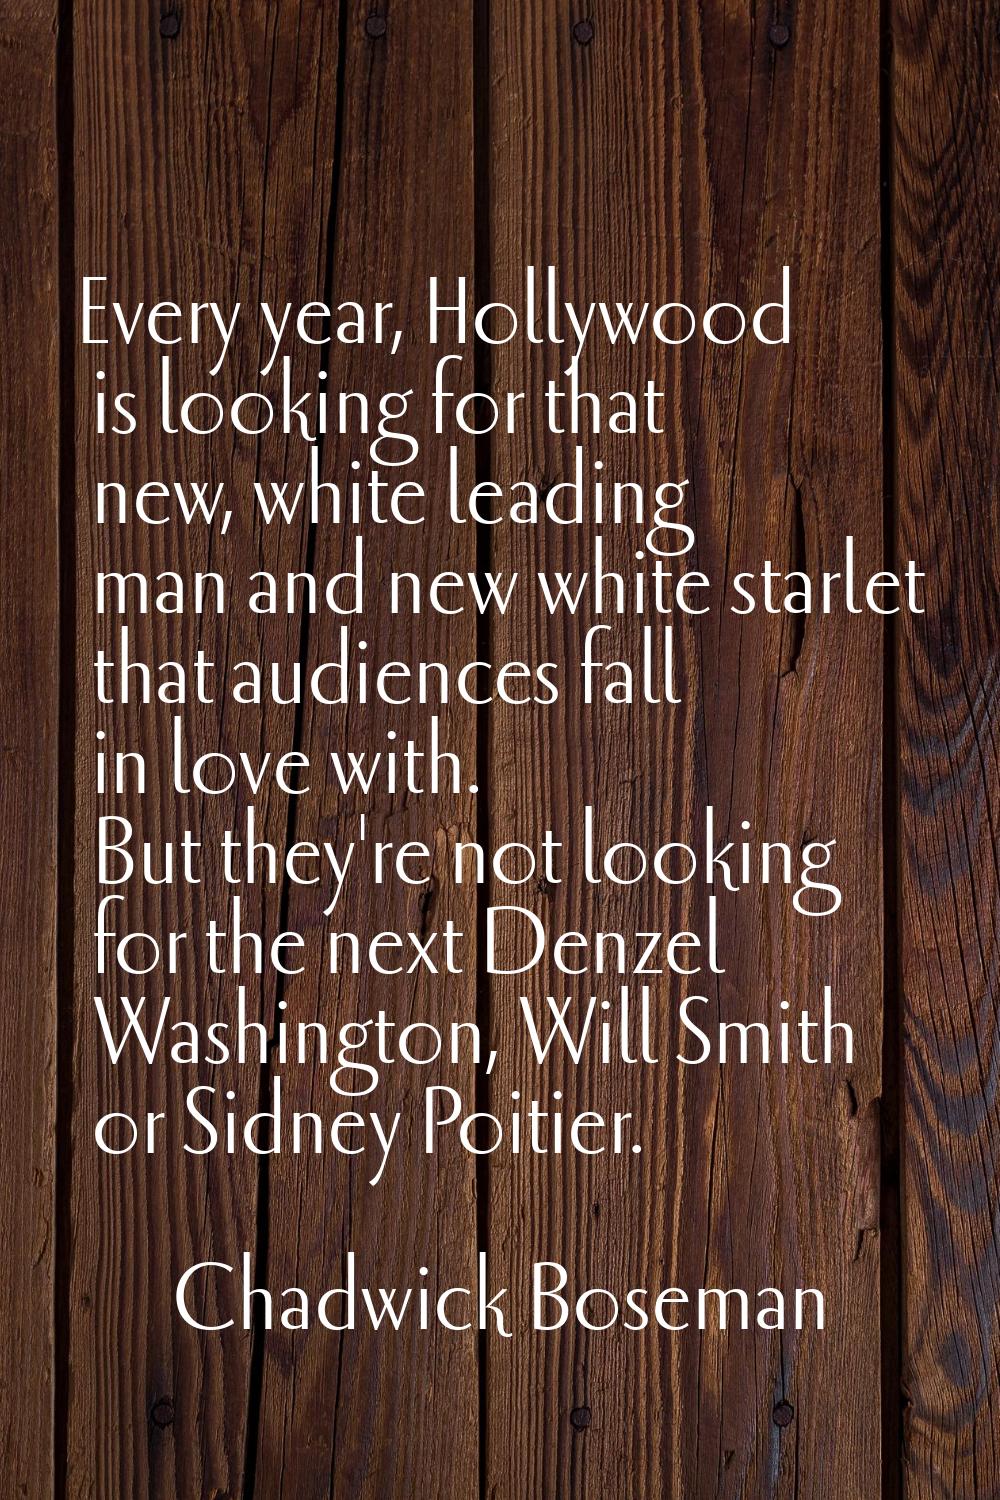 Every year, Hollywood is looking for that new, white leading man and new white starlet that audienc